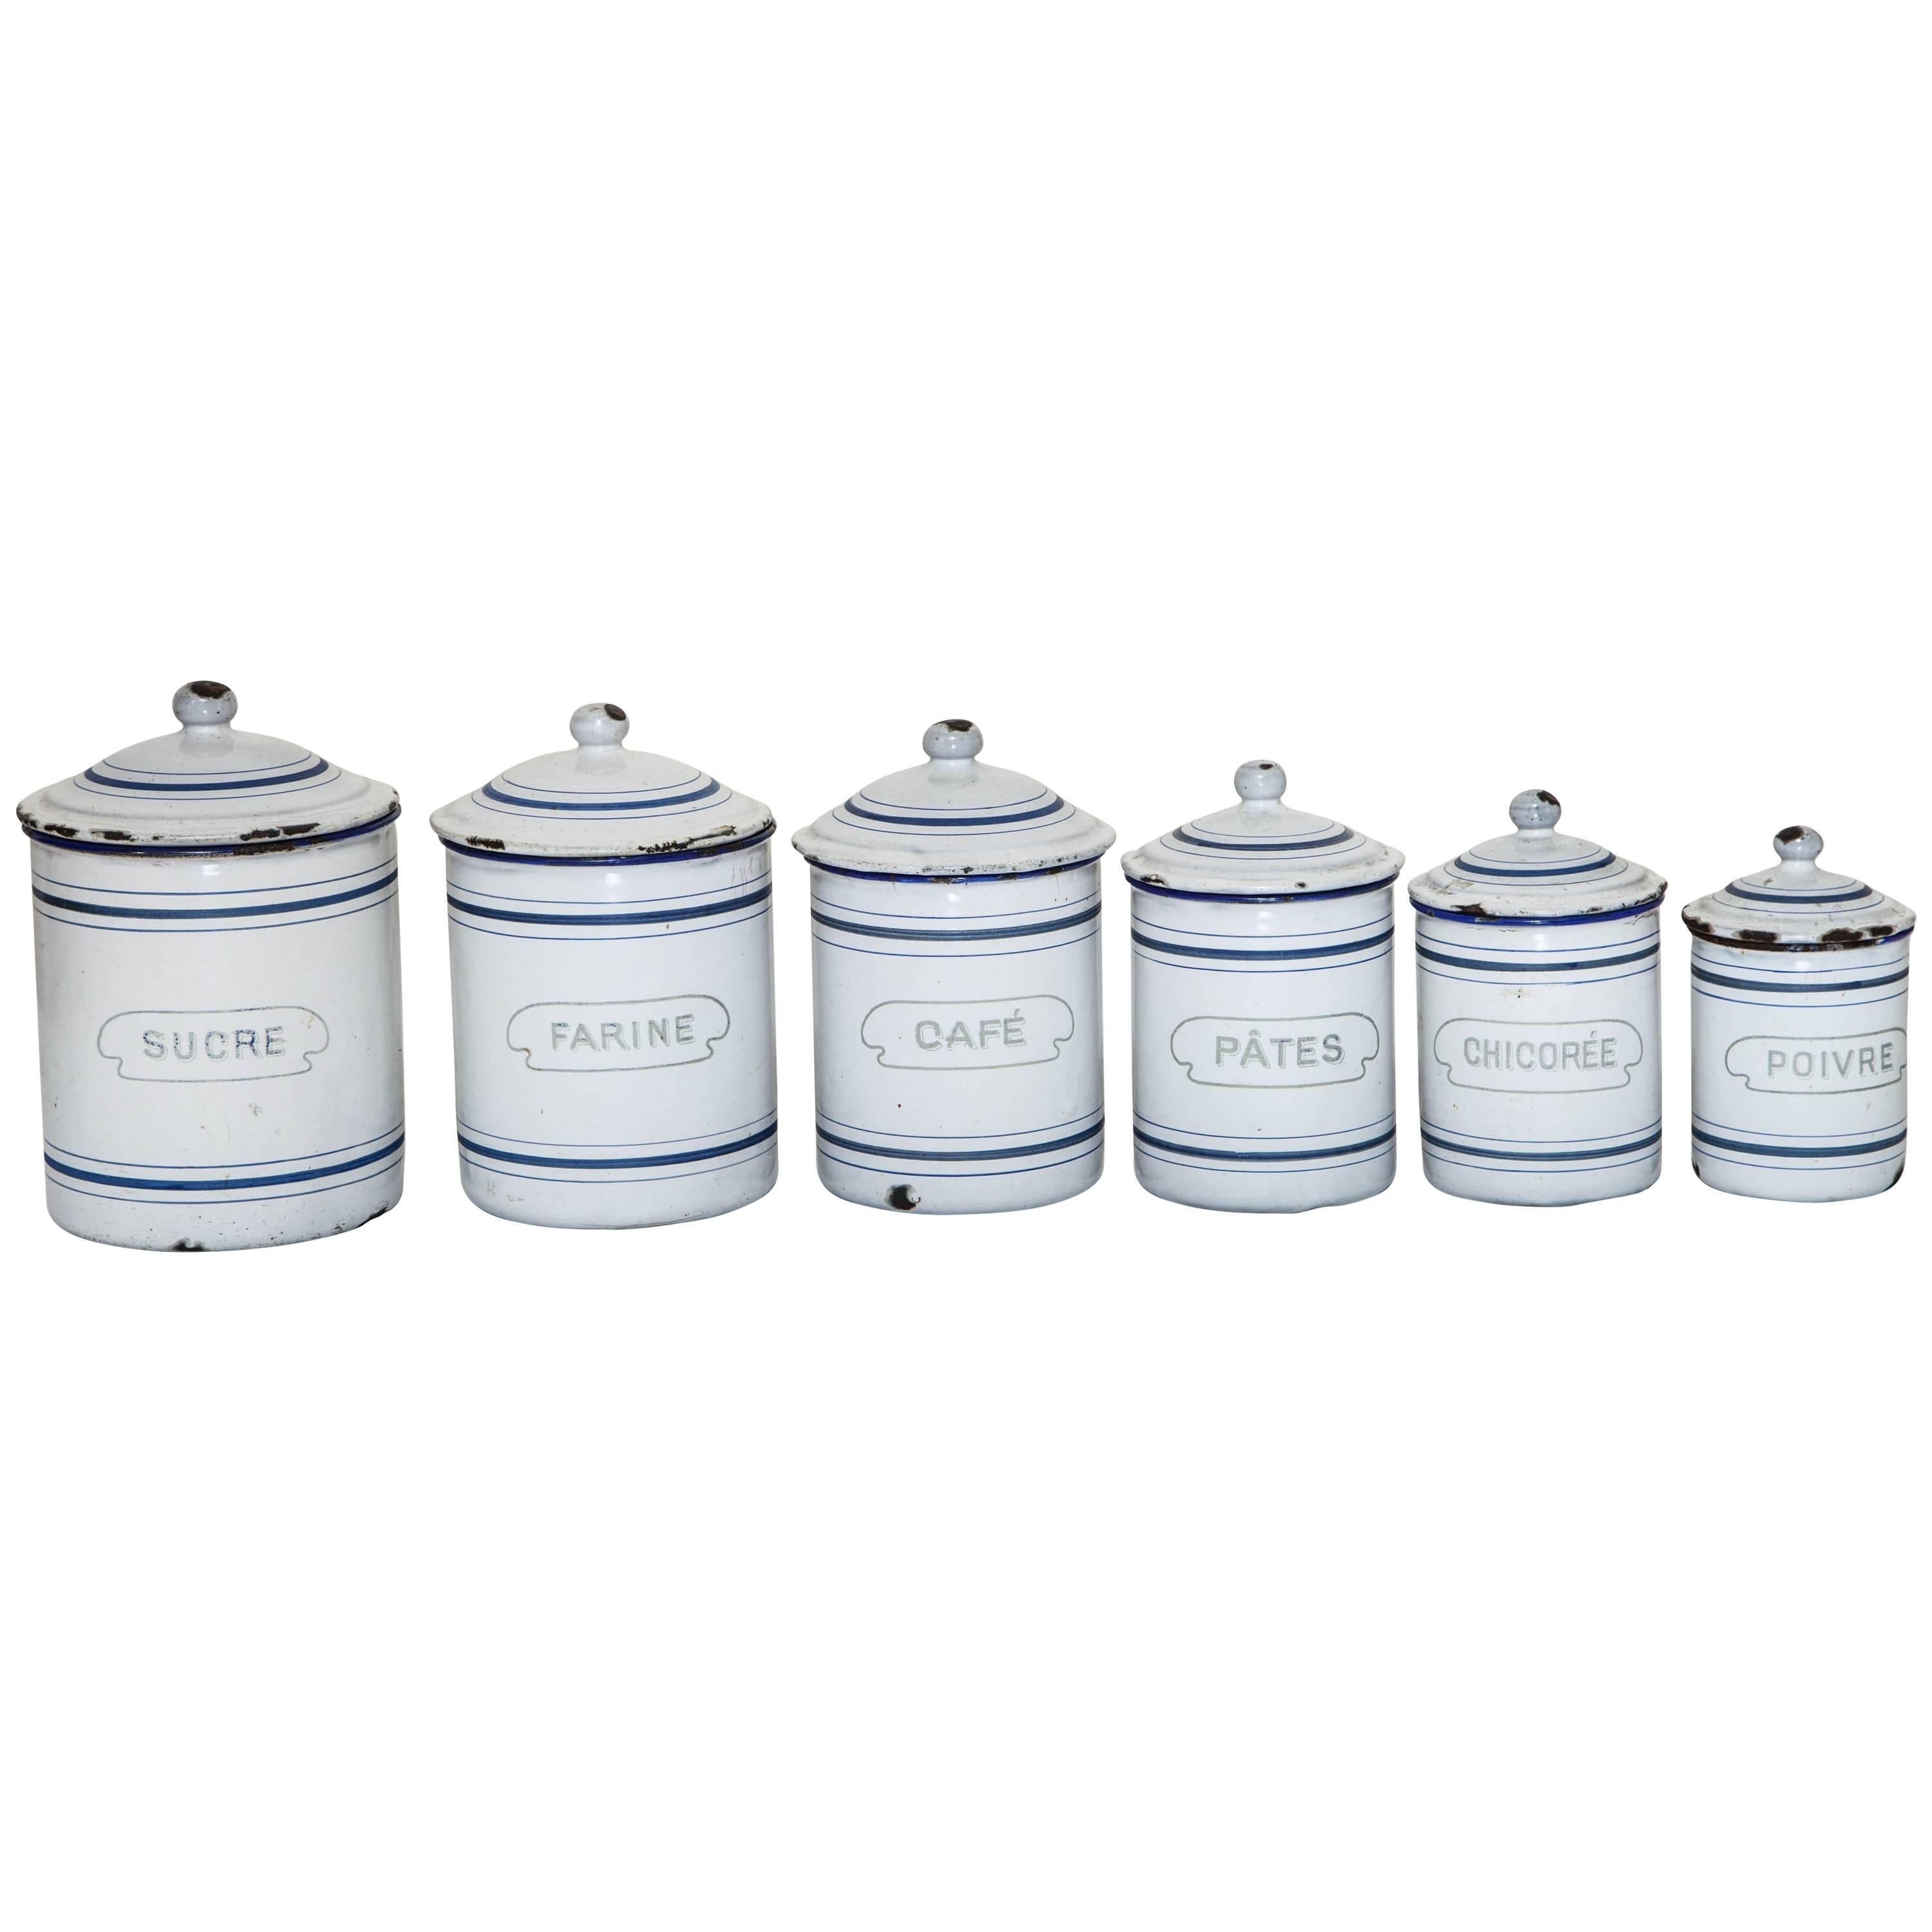 Six-Piece Antique French Pantry Tin Canisters